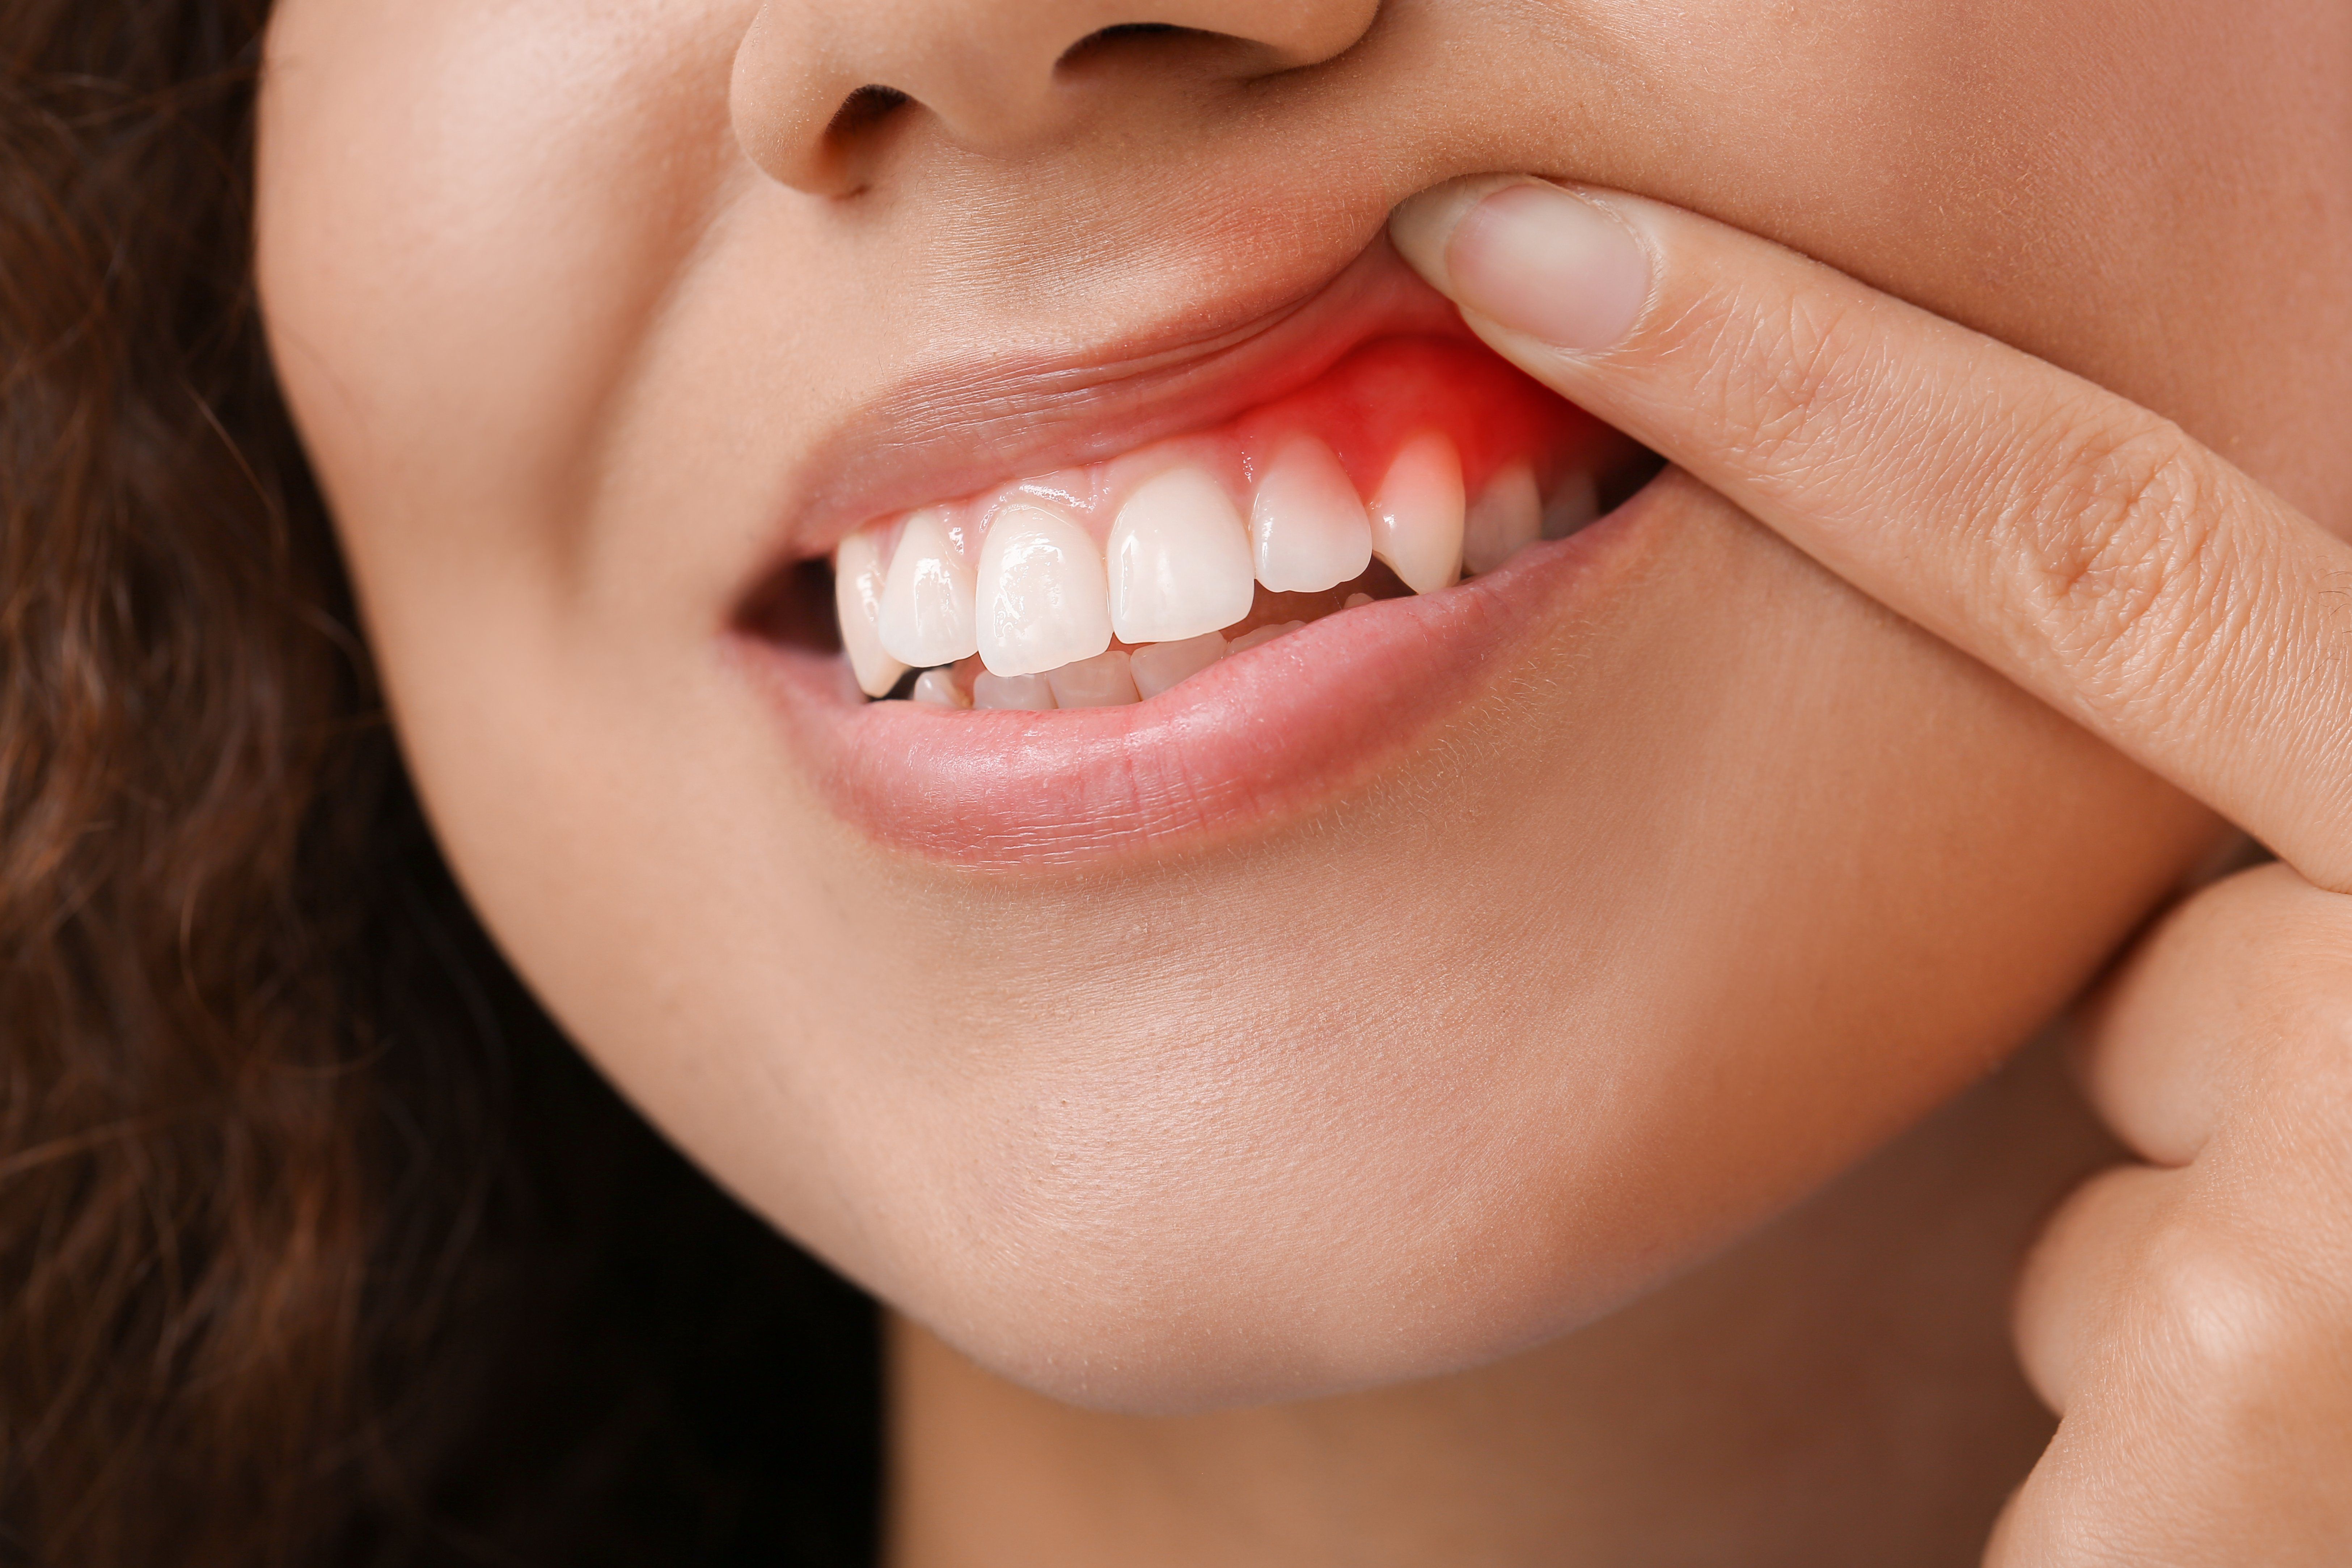 Can Periodontal Disease Affect Your Body's Overall Health?